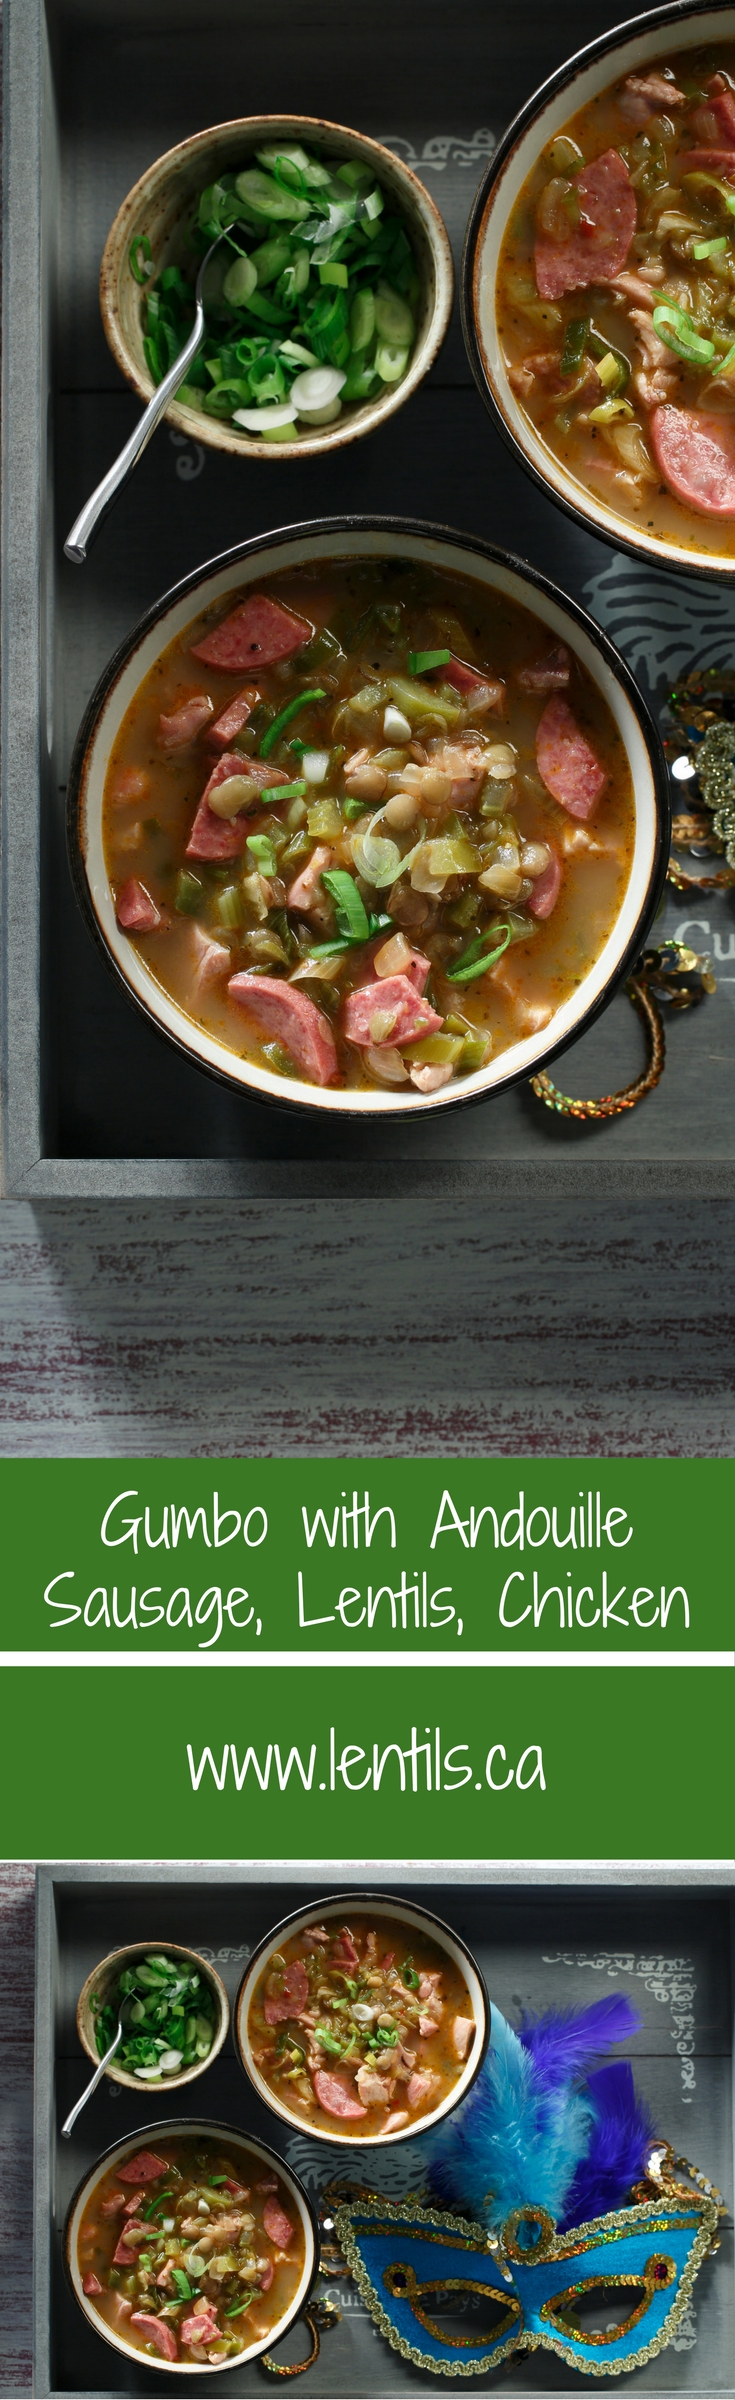 Lentil and Sausage Gumbo Soup - Lana's Cooking